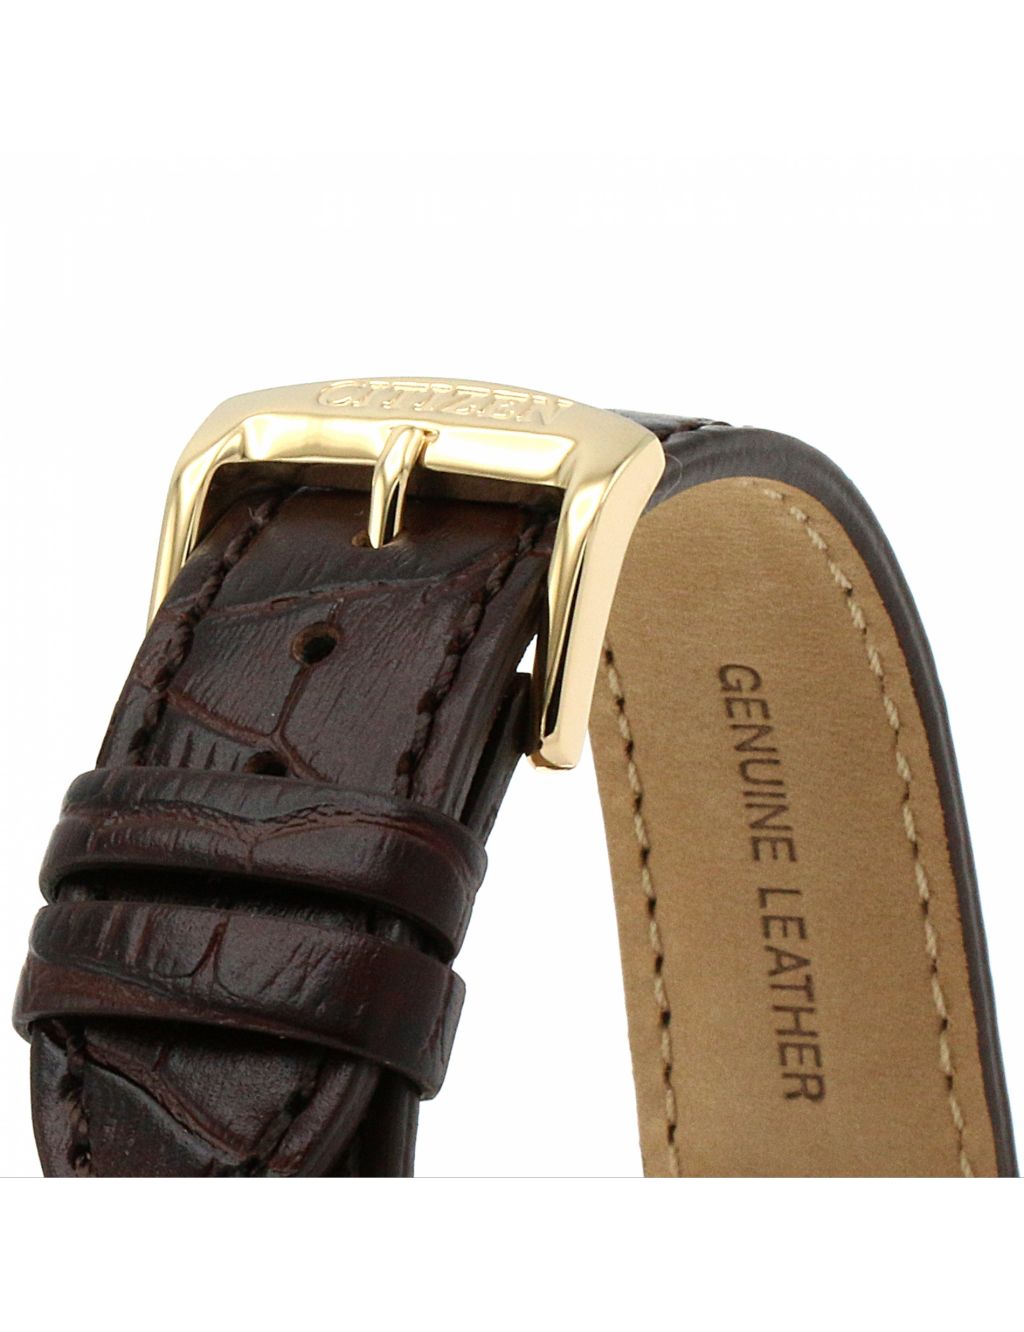 Citizen Classic  Leather Watch image 3